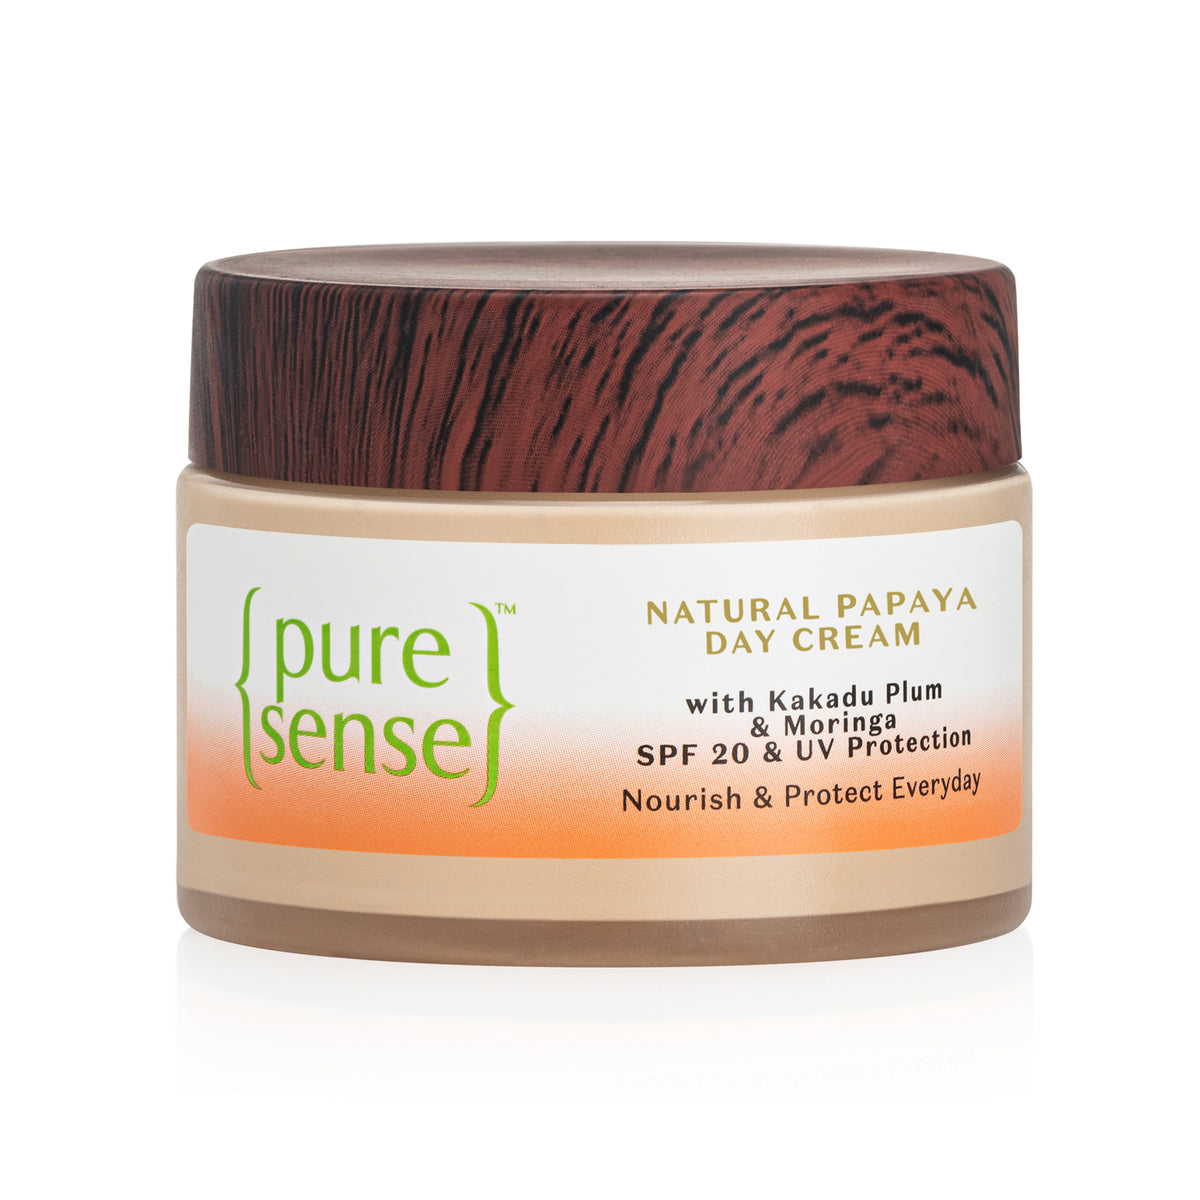 Natural Papaya Day Cream | From the makers of Parachute Advansed | 60g - PureSense